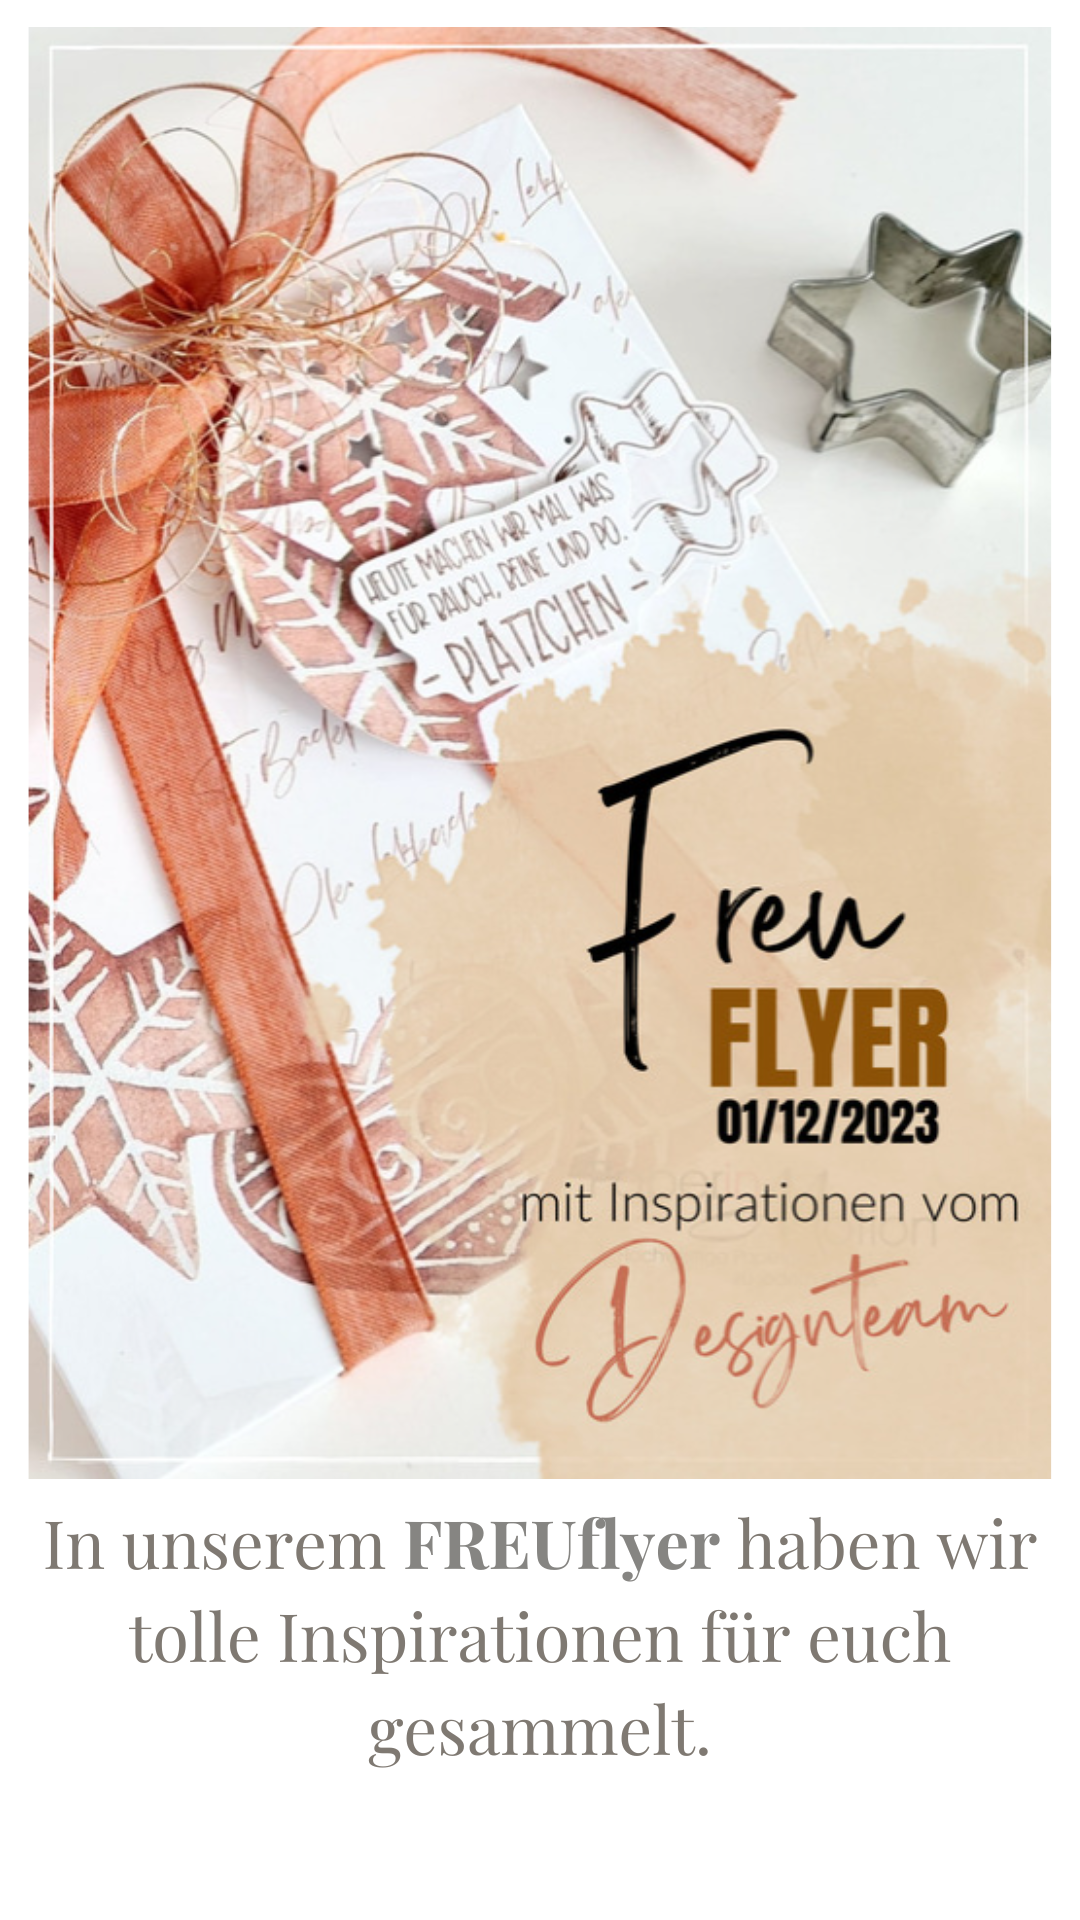 Freuflyer-Cover_01-12-2023